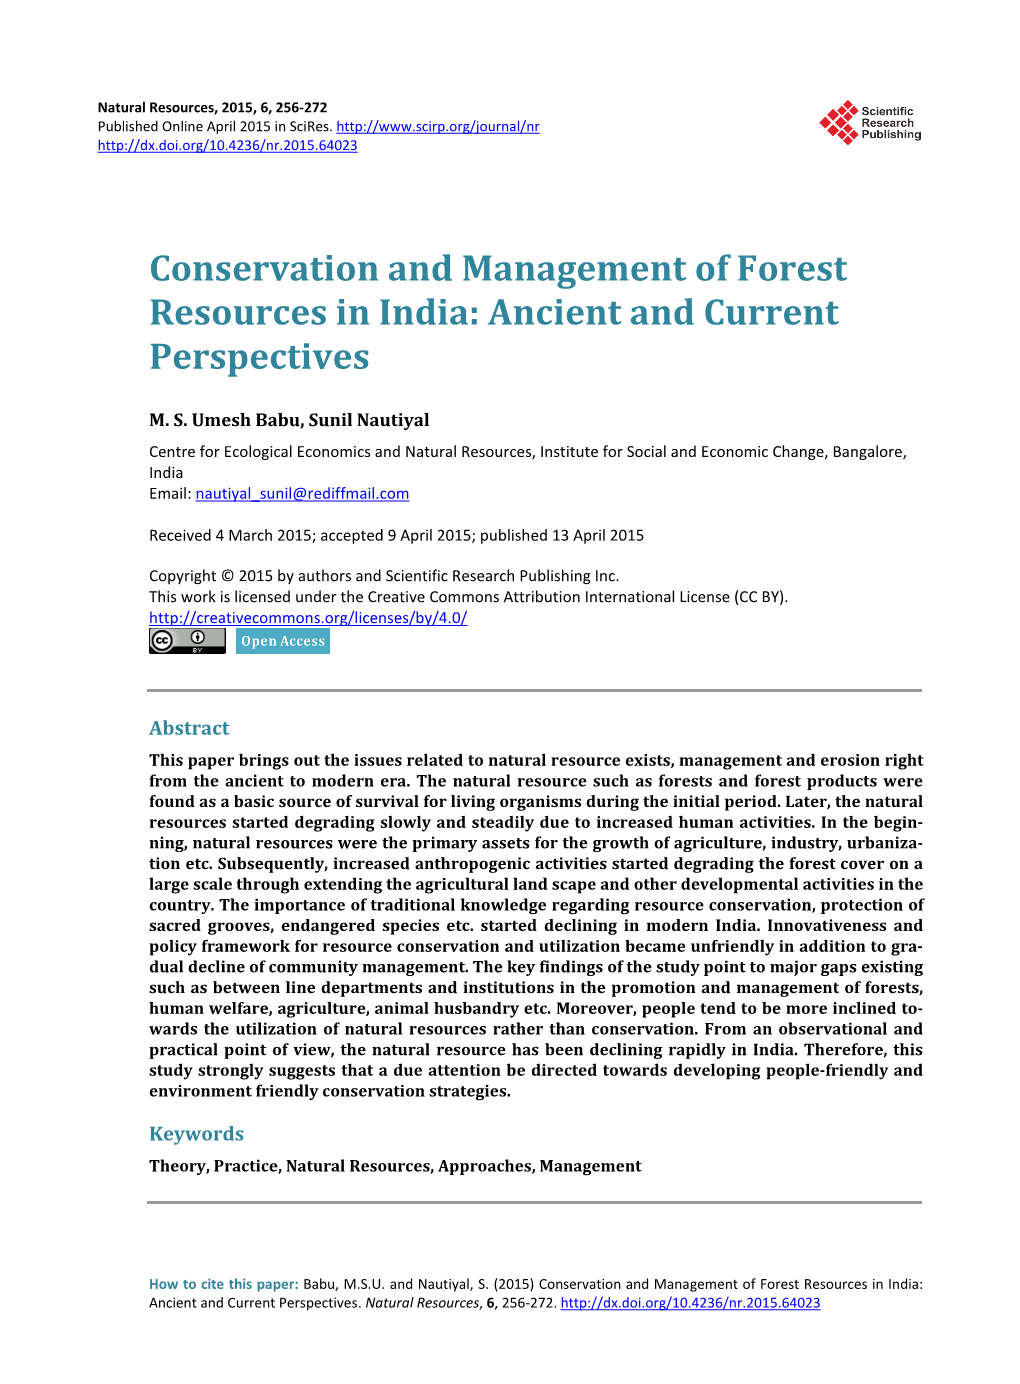 Conservation and Management of Forest Resources in India: Ancient and Current Perspectives